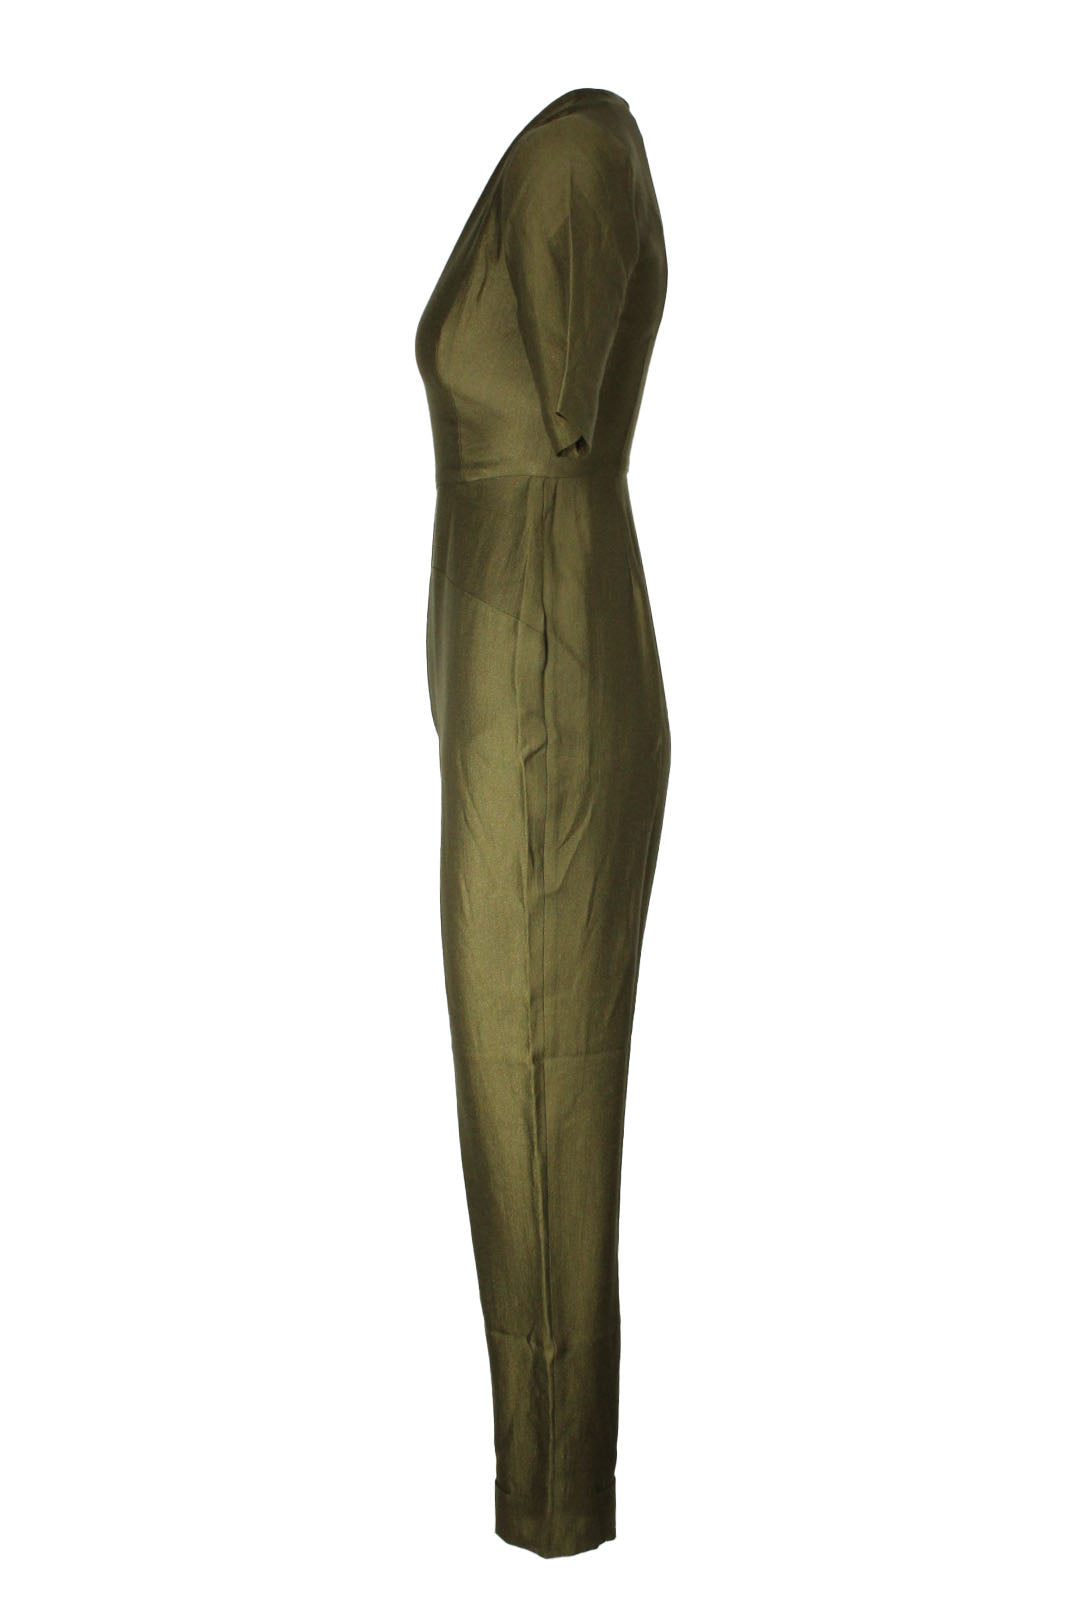 sau olive toned jumpsuit. fabric has slight crinkle and a shimmer. features fabric with v neck cut, detail paneled stitching around waist and darts along chest, pockets and back zipper. cuffed hem at pants